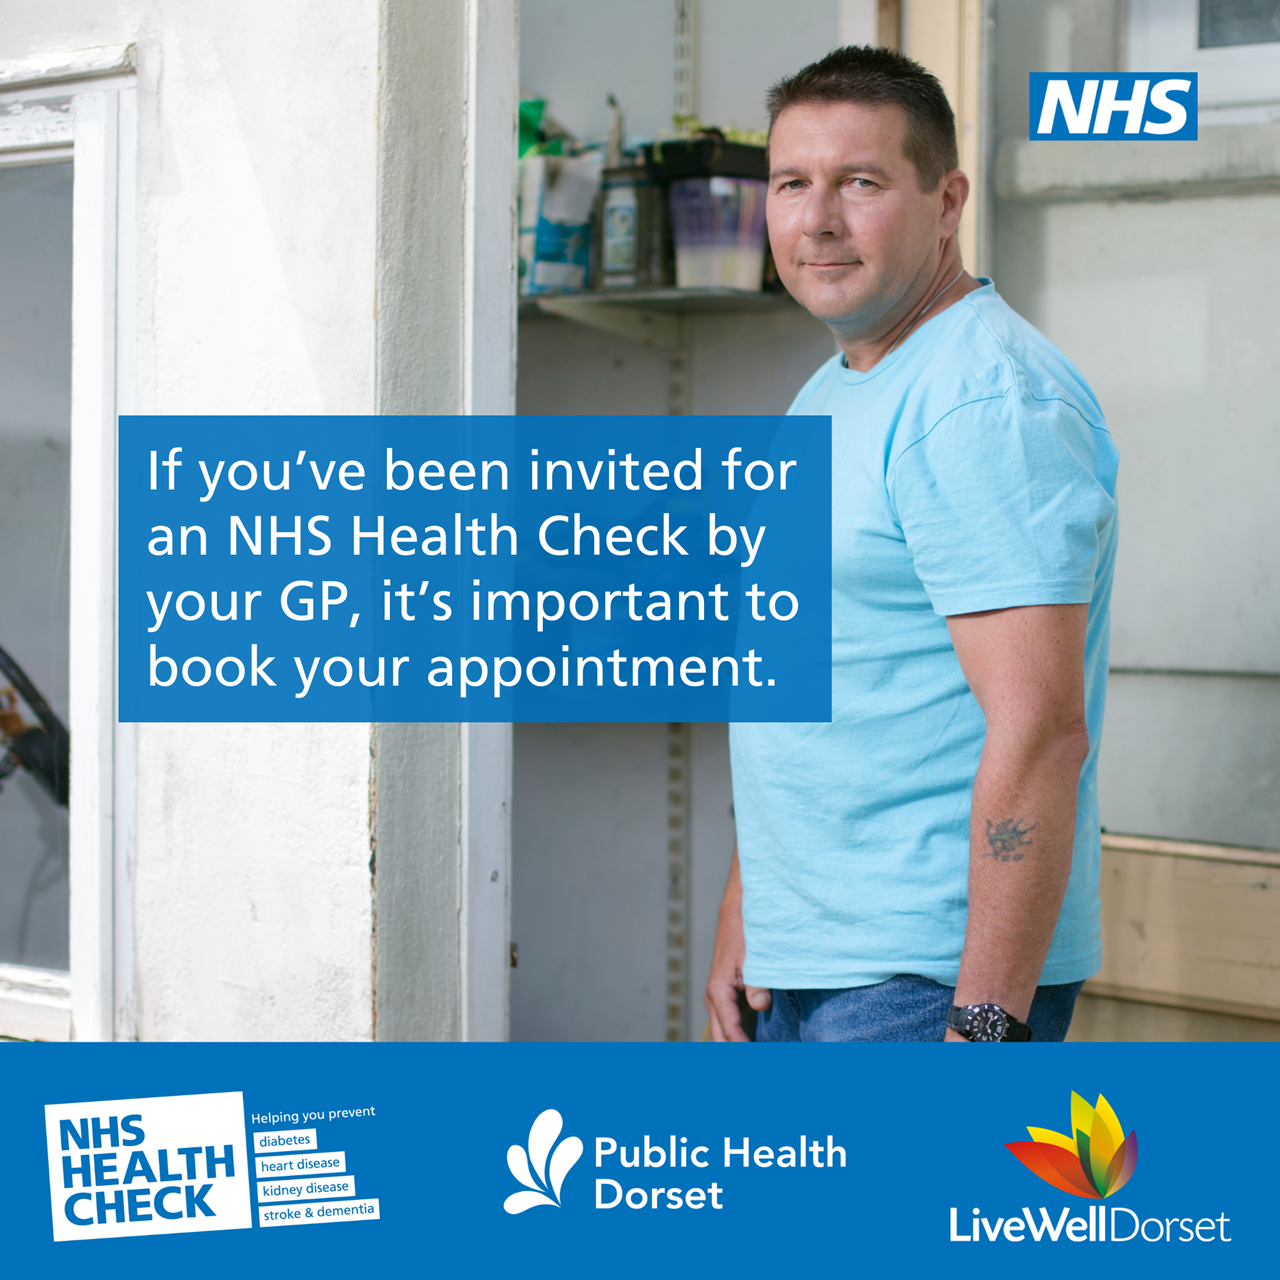 the Nhs logo and the words if you have been invited for an NHS health check by your GP, its important to book your appointment